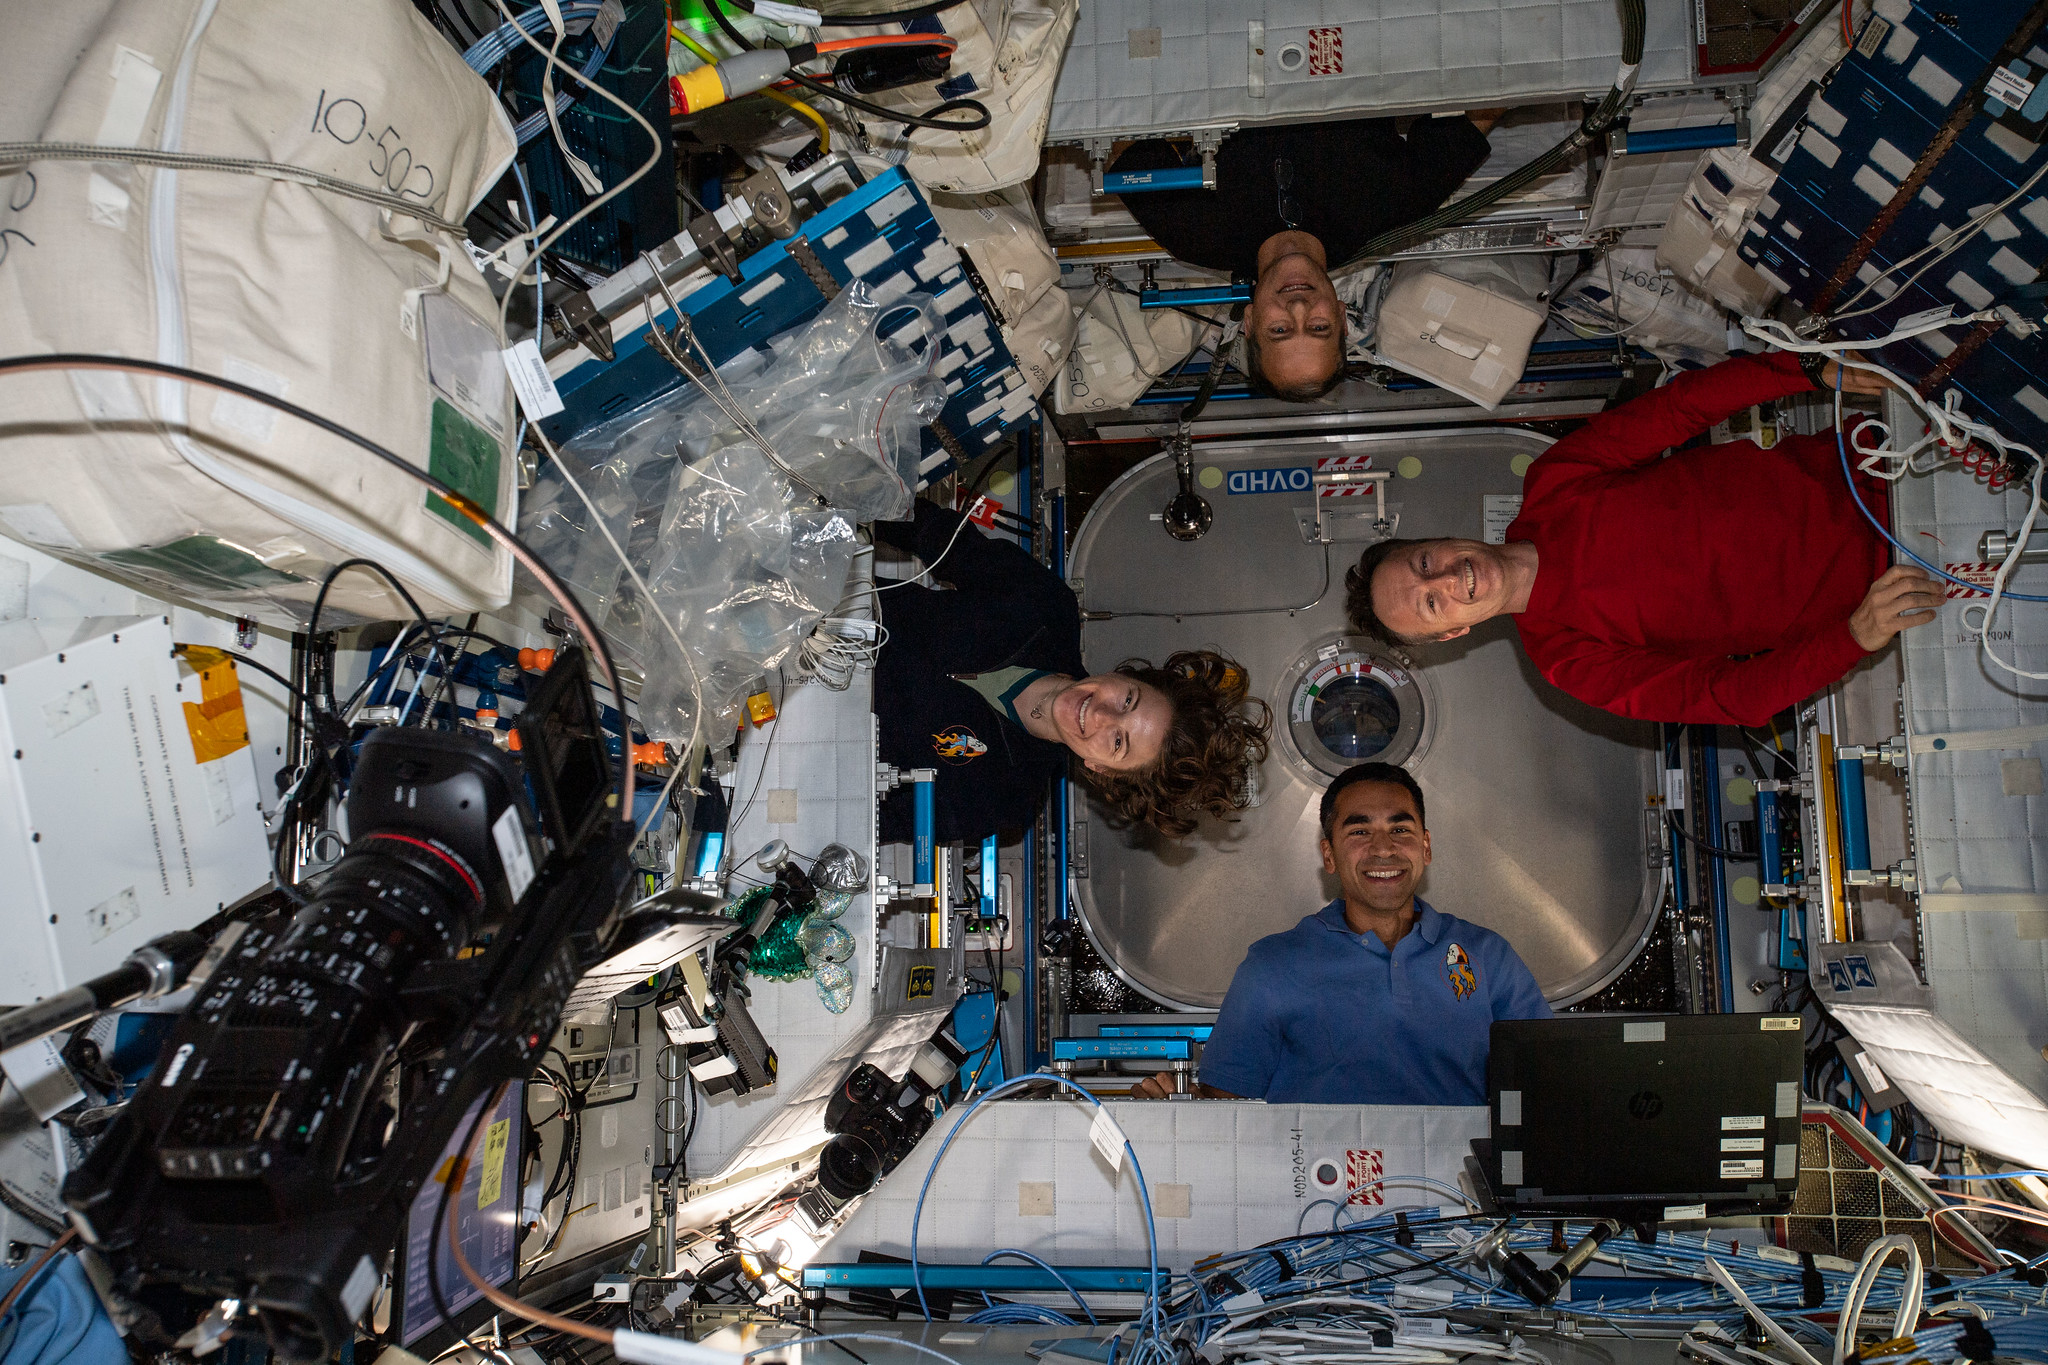 Clockwise from bottom, are NASA astronauts Raja Chari, Kayla Barron and Thomas Marshburn with ESA (European Space Agency) astronaut Matthias Maurer are pictured during a playful portrait aboard the International Space Station.